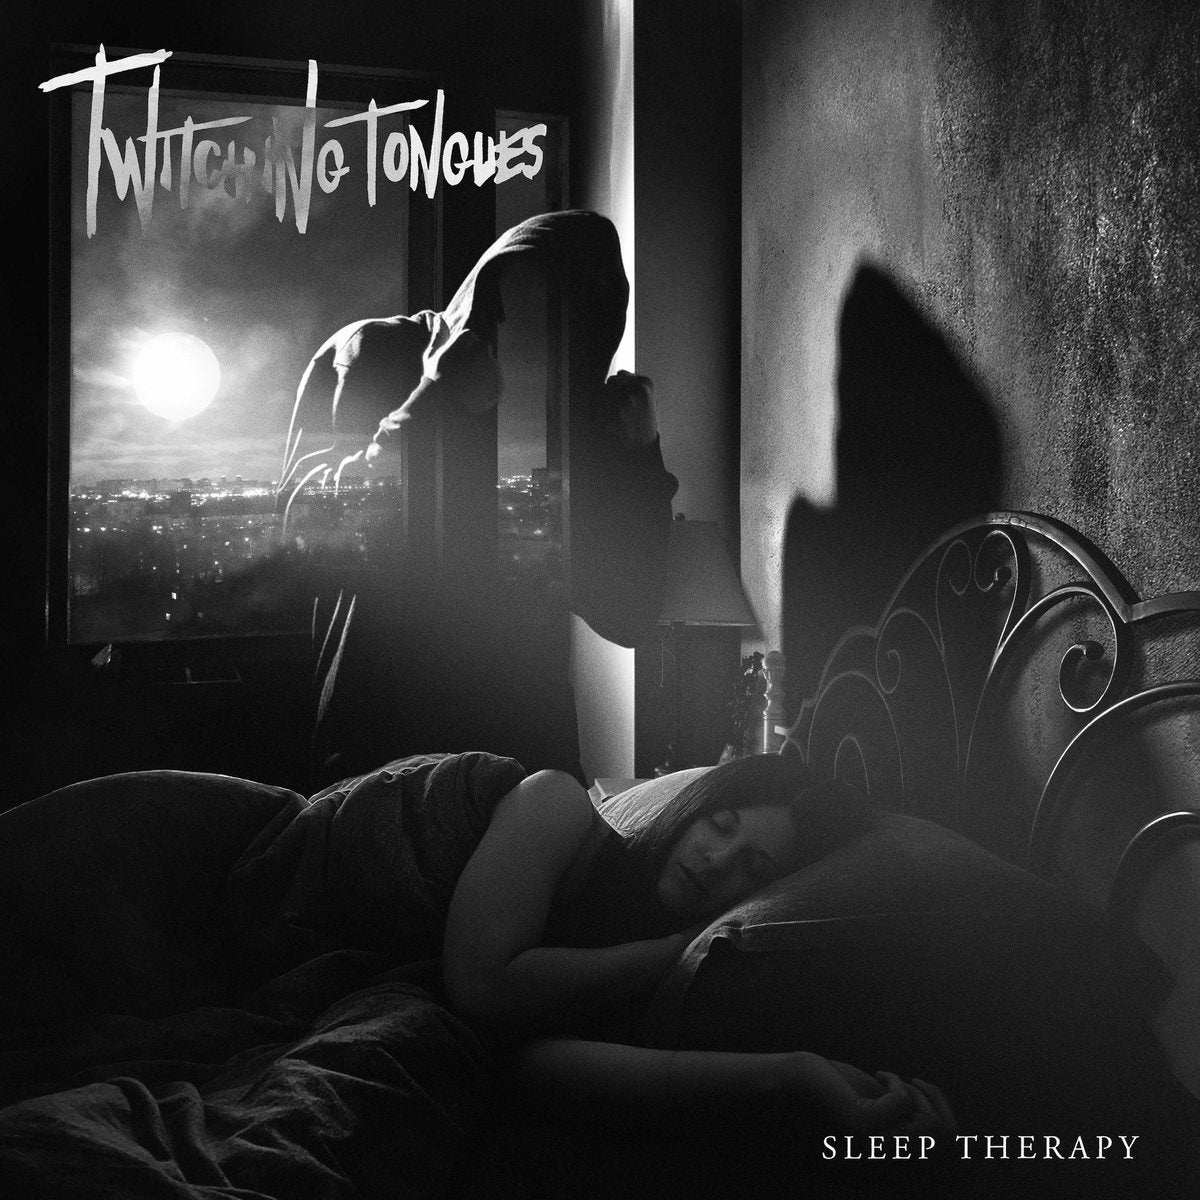 Twitching Tongues - Sleep Therapy (redux) 2xLP - Vinyl - Closed Casket Activities